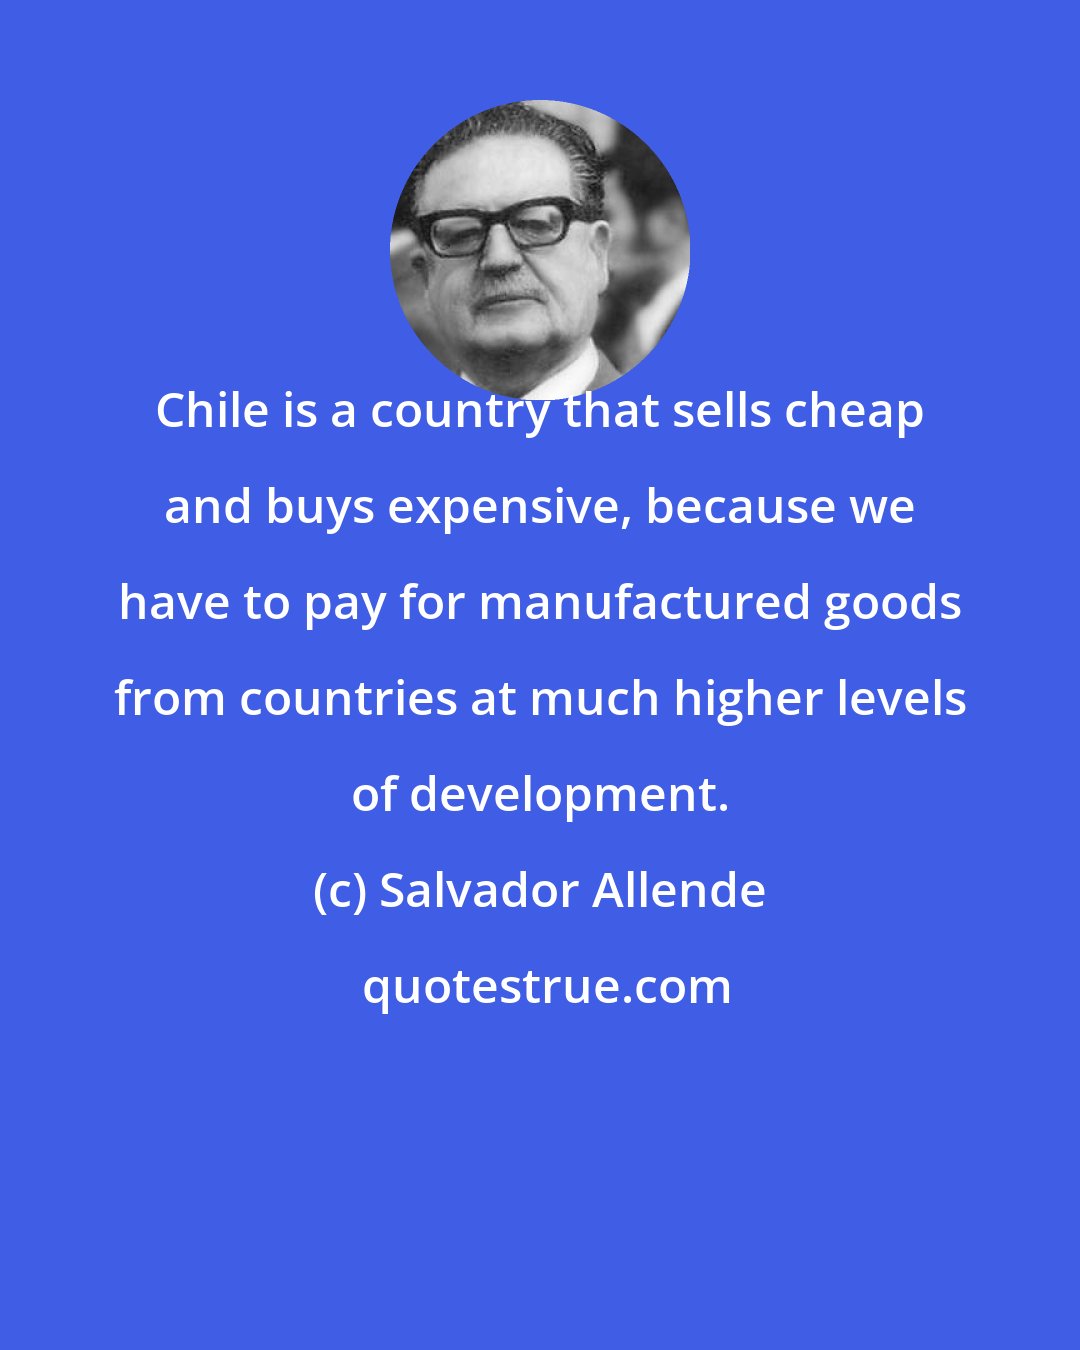 Salvador Allende: Chile is a country that sells cheap and buys expensive, because we have to pay for manufactured goods from countries at much higher levels of development.